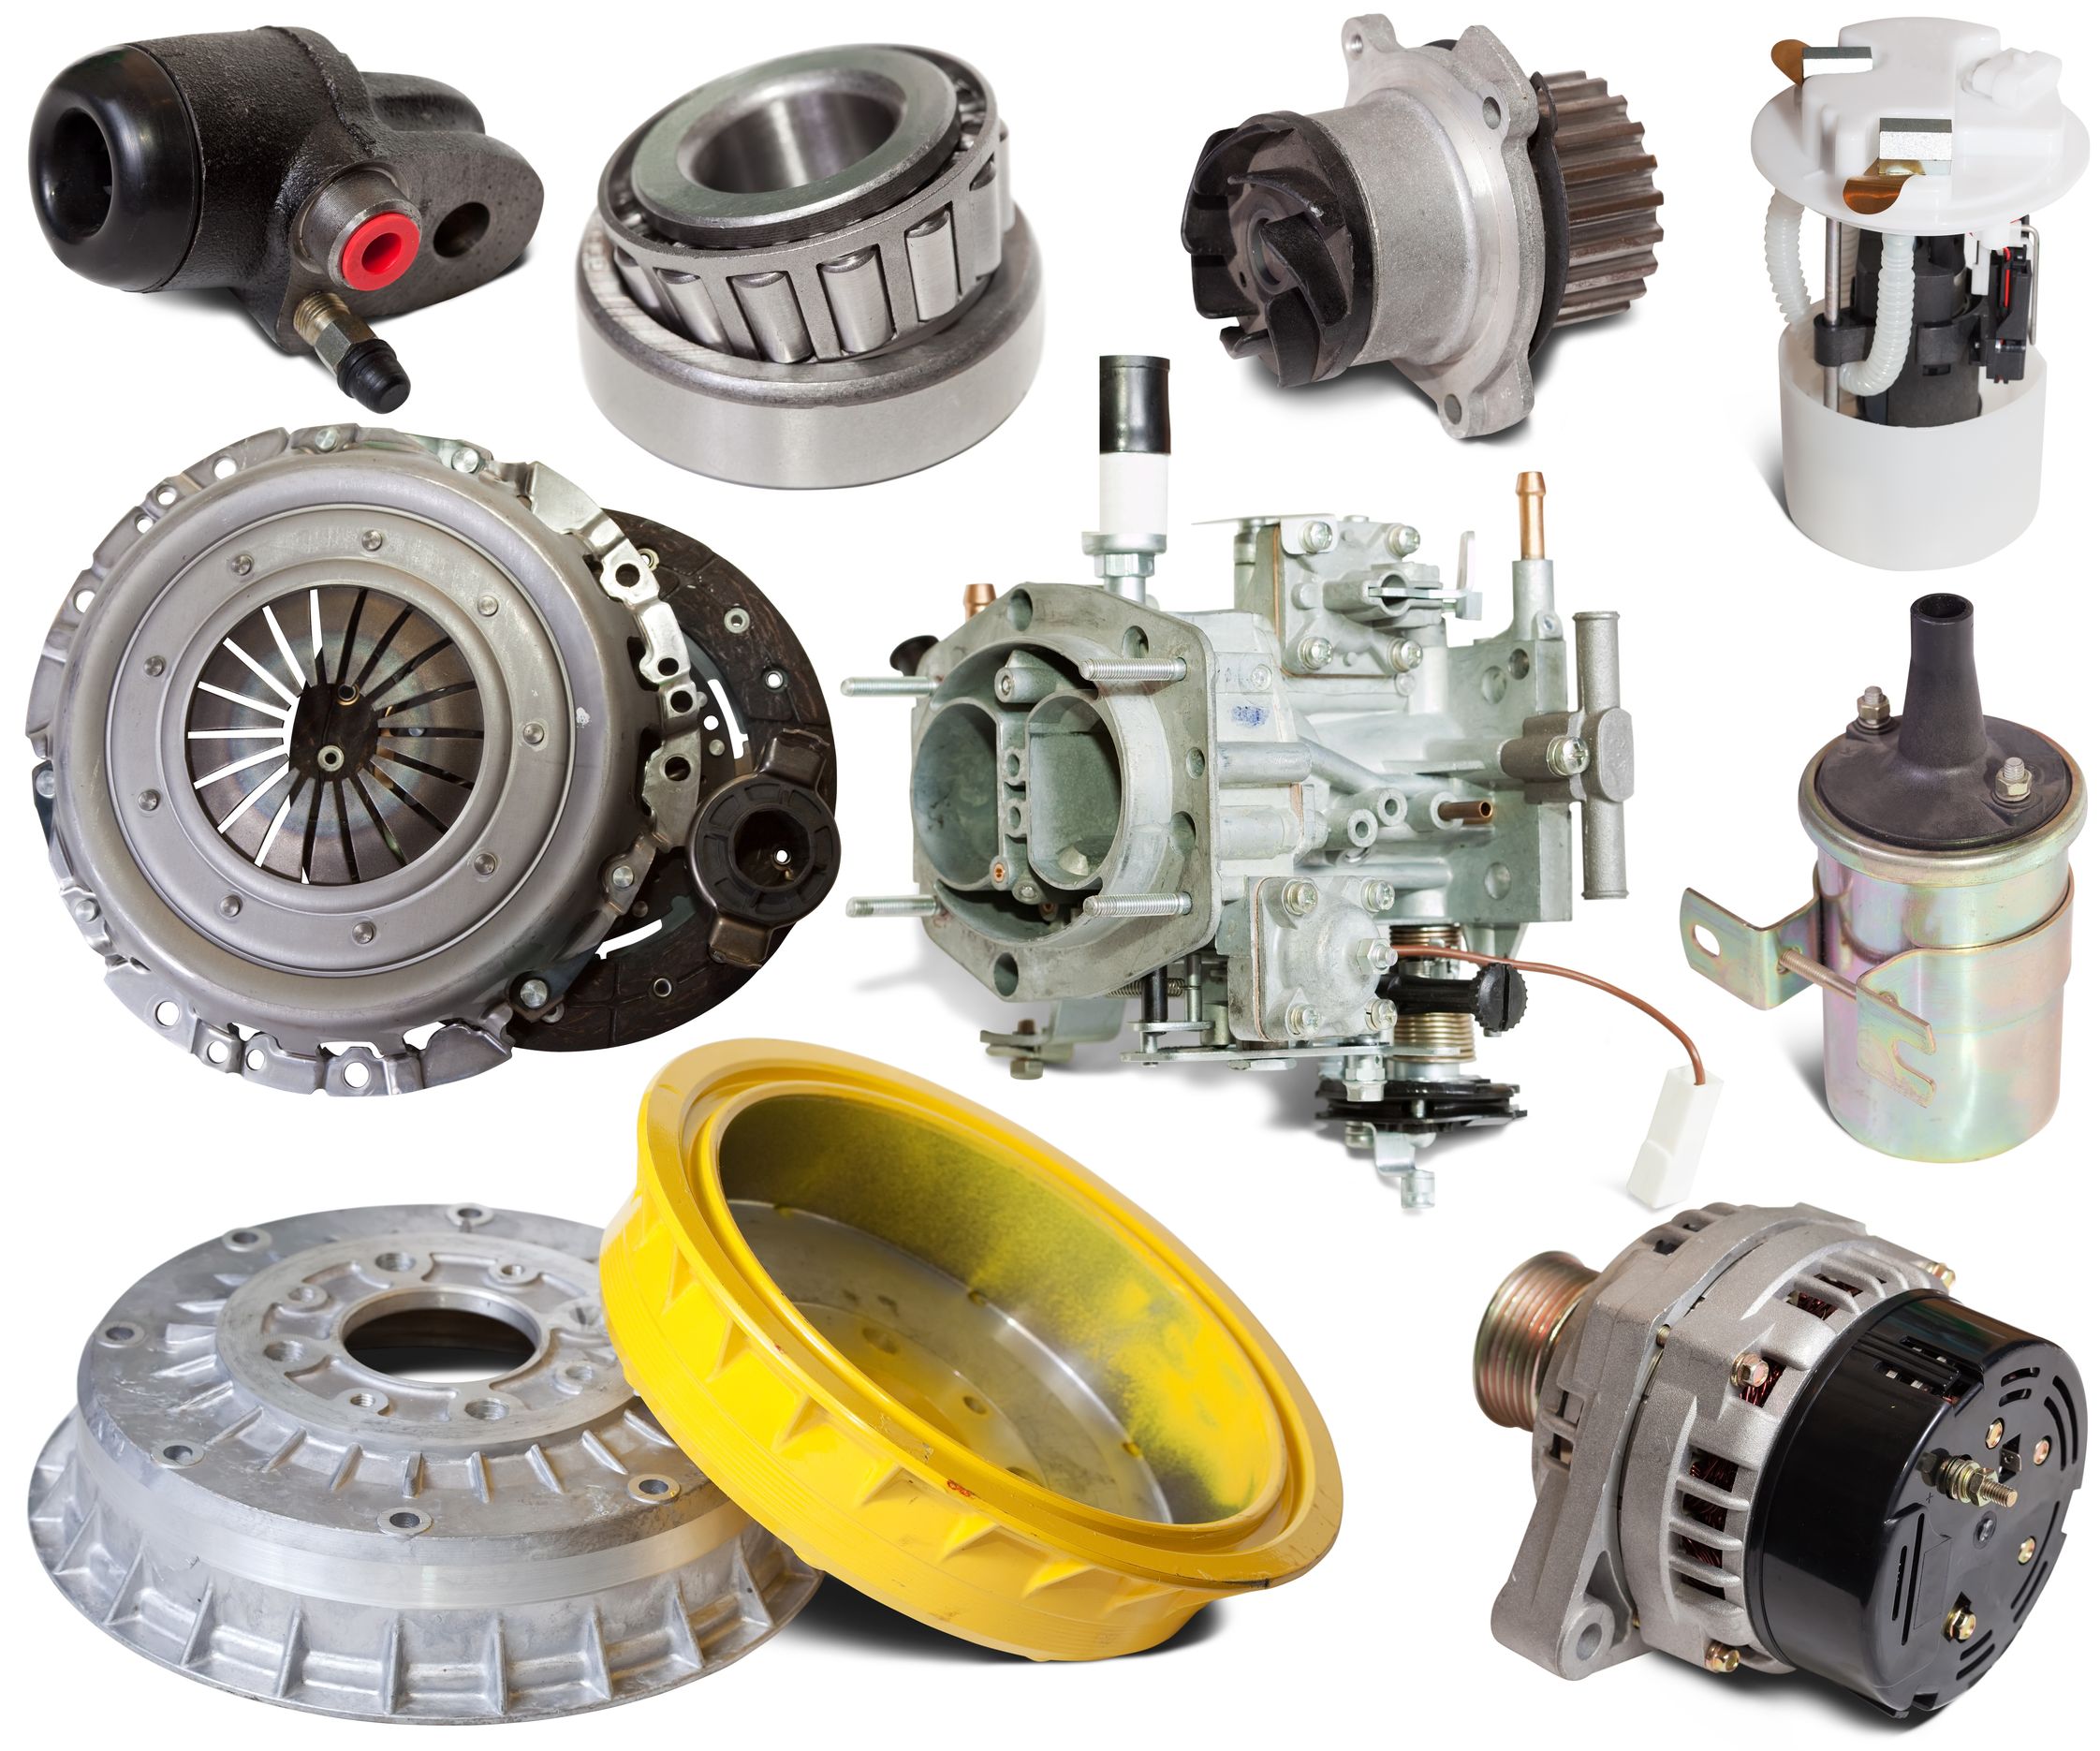 Essential Considerations to Get the Perfect Chicago Auto Parts